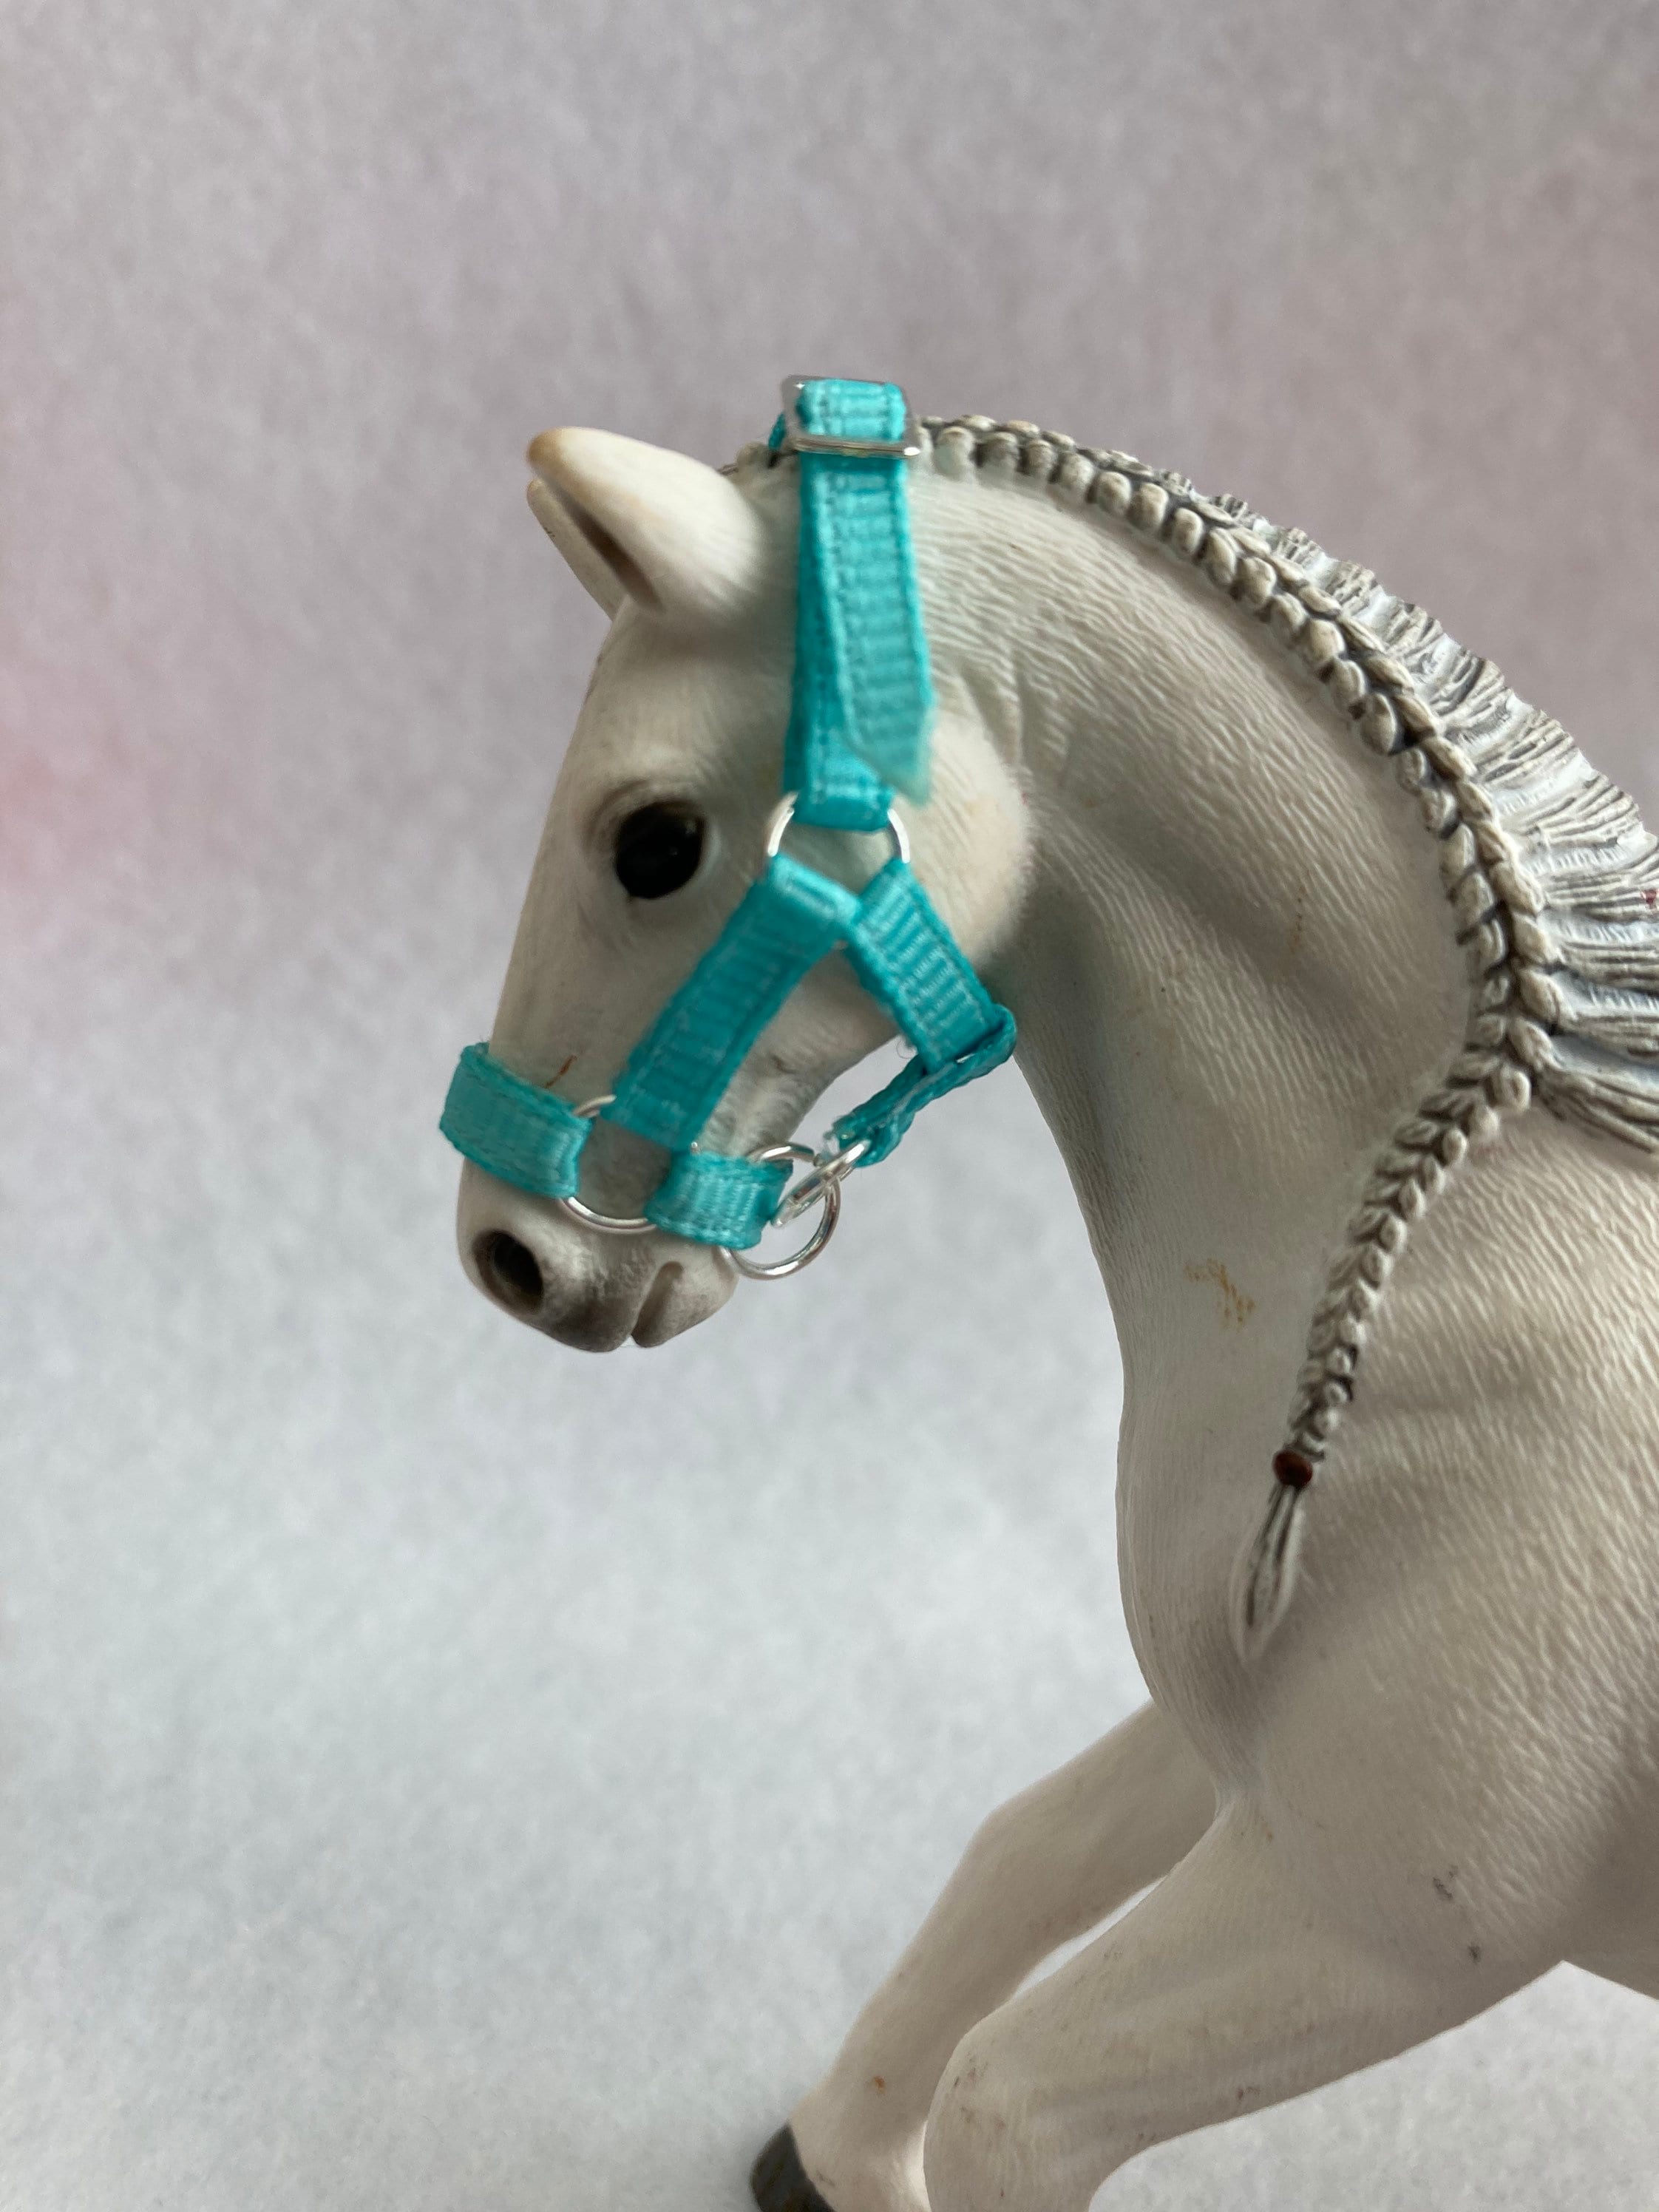 Schleich Horse Halters Among Us